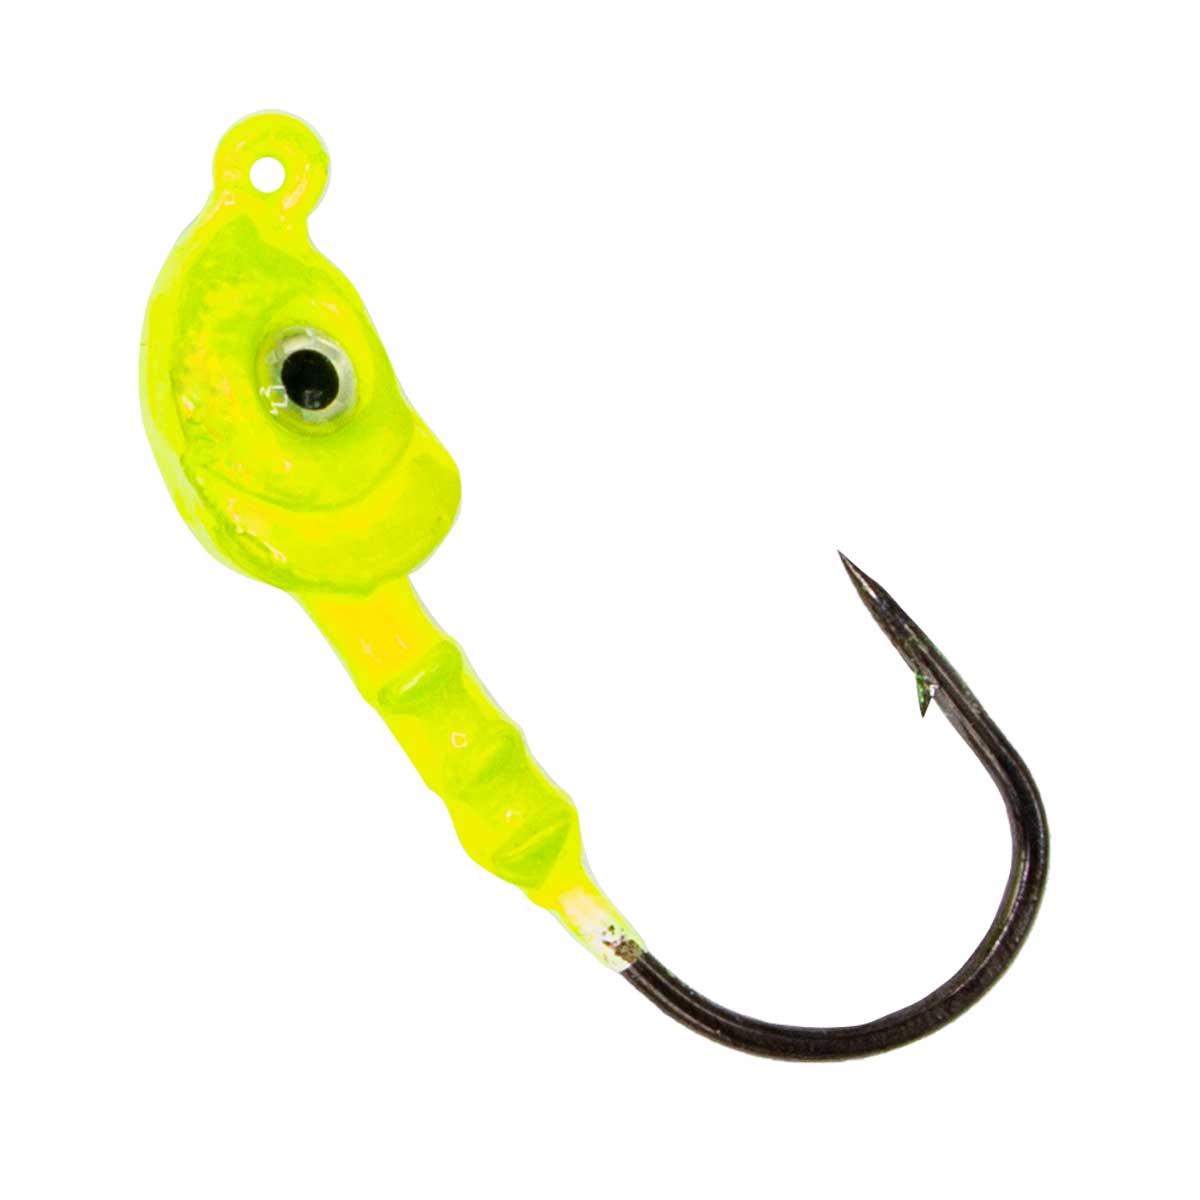 Charlie's Worms Potbelly Bucktail Jig 1/4oz, 3/8oz, 1/2oz. Hand-Tied  Fishing Lure Freshwater Saltwater Bass Fishing